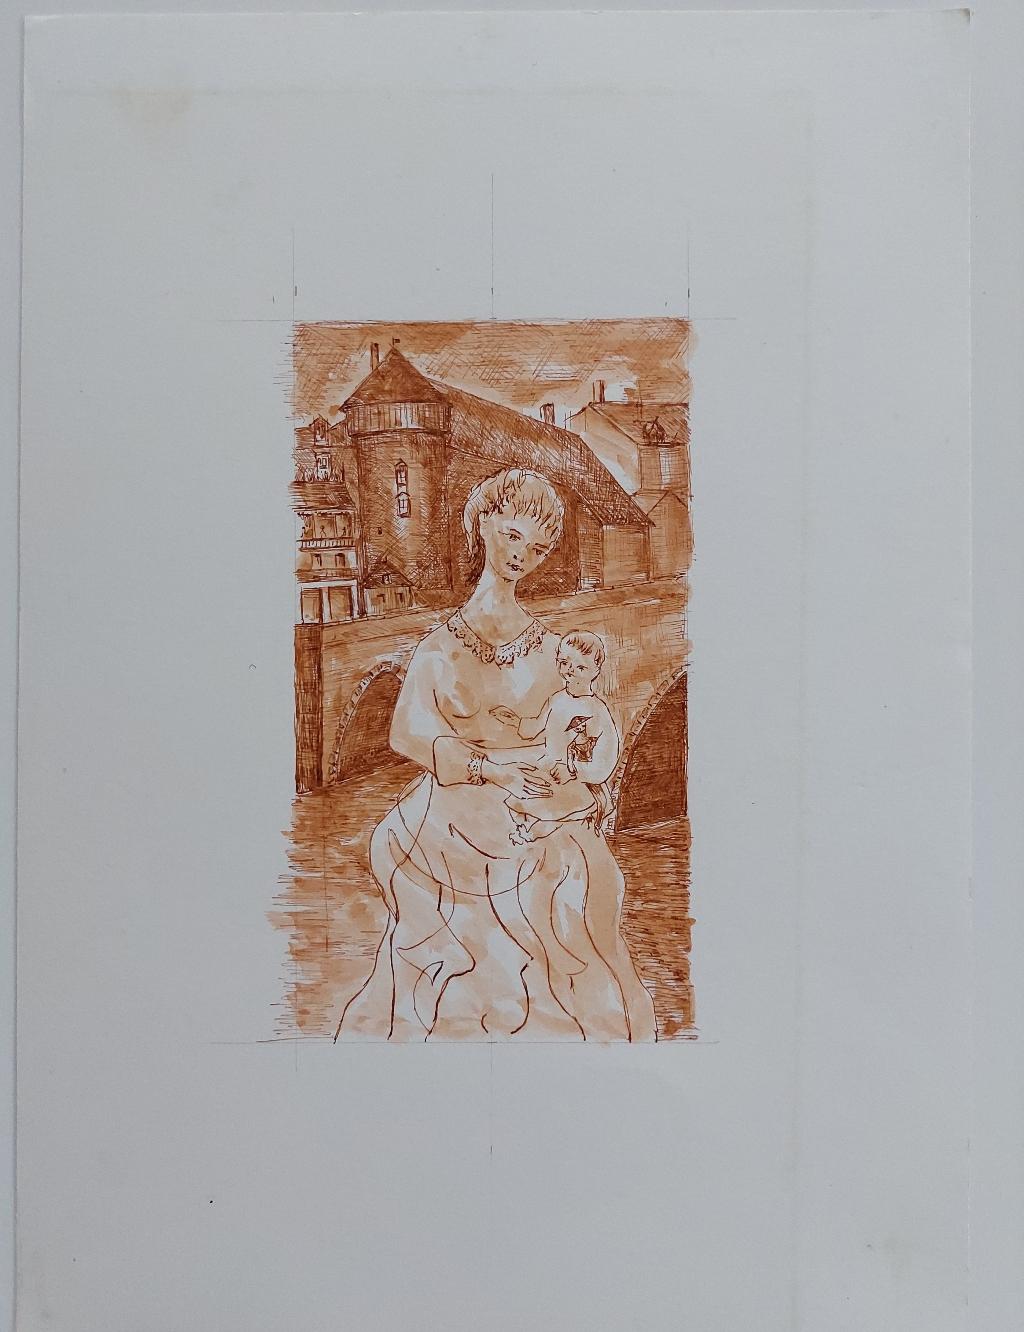 Sepia ink and watercolor study of a mother holding a child against a backdrop of a town bridge
by Bernard Labbe (French mid 20th century)
original sepia ink and watercolor on paper
image size: 6.25 x 3.5 inches
sheet overall: 11.75 x 8.25